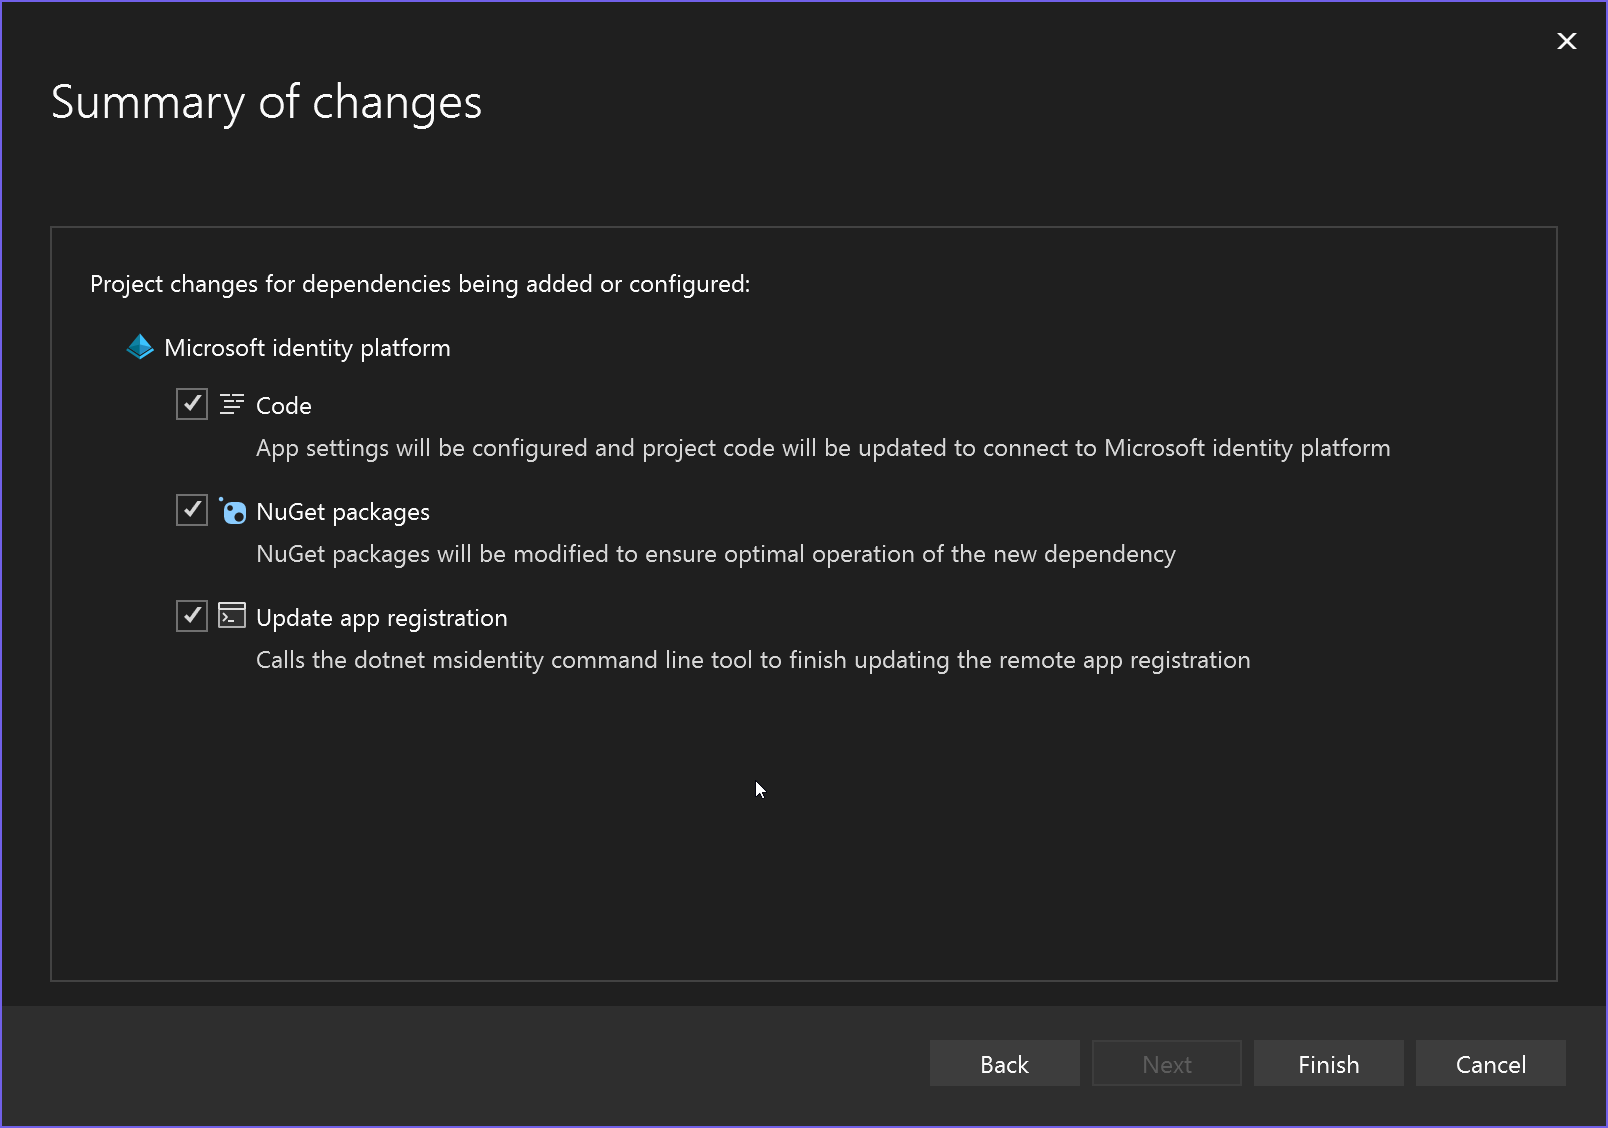 Screenshot showing Summary of changes screen.